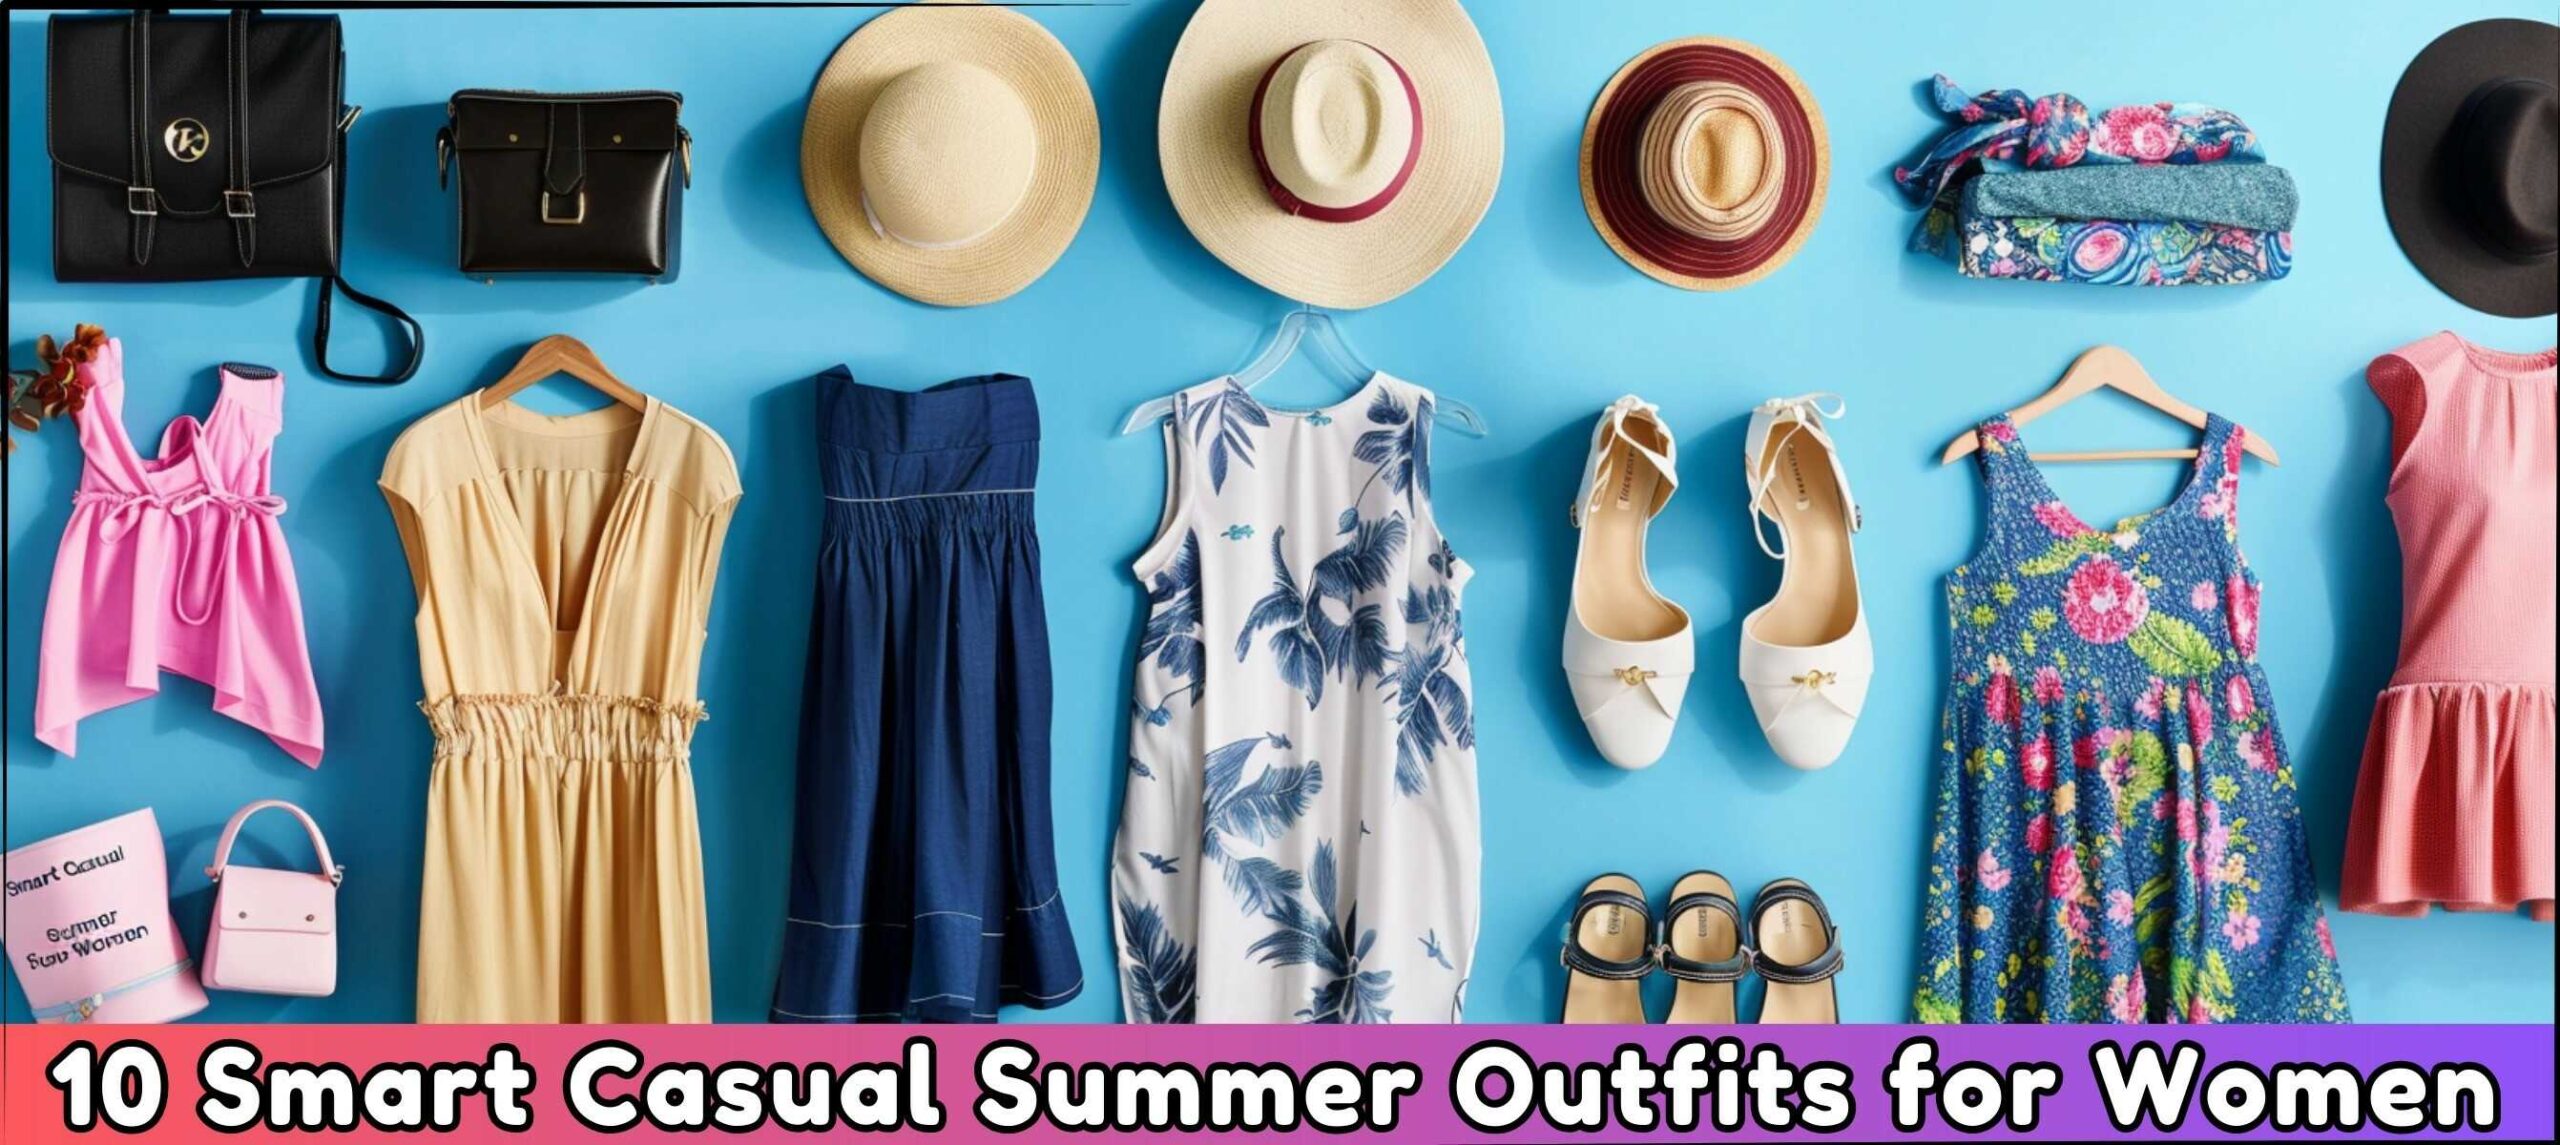 Smart Casual Summer Outfits for Women